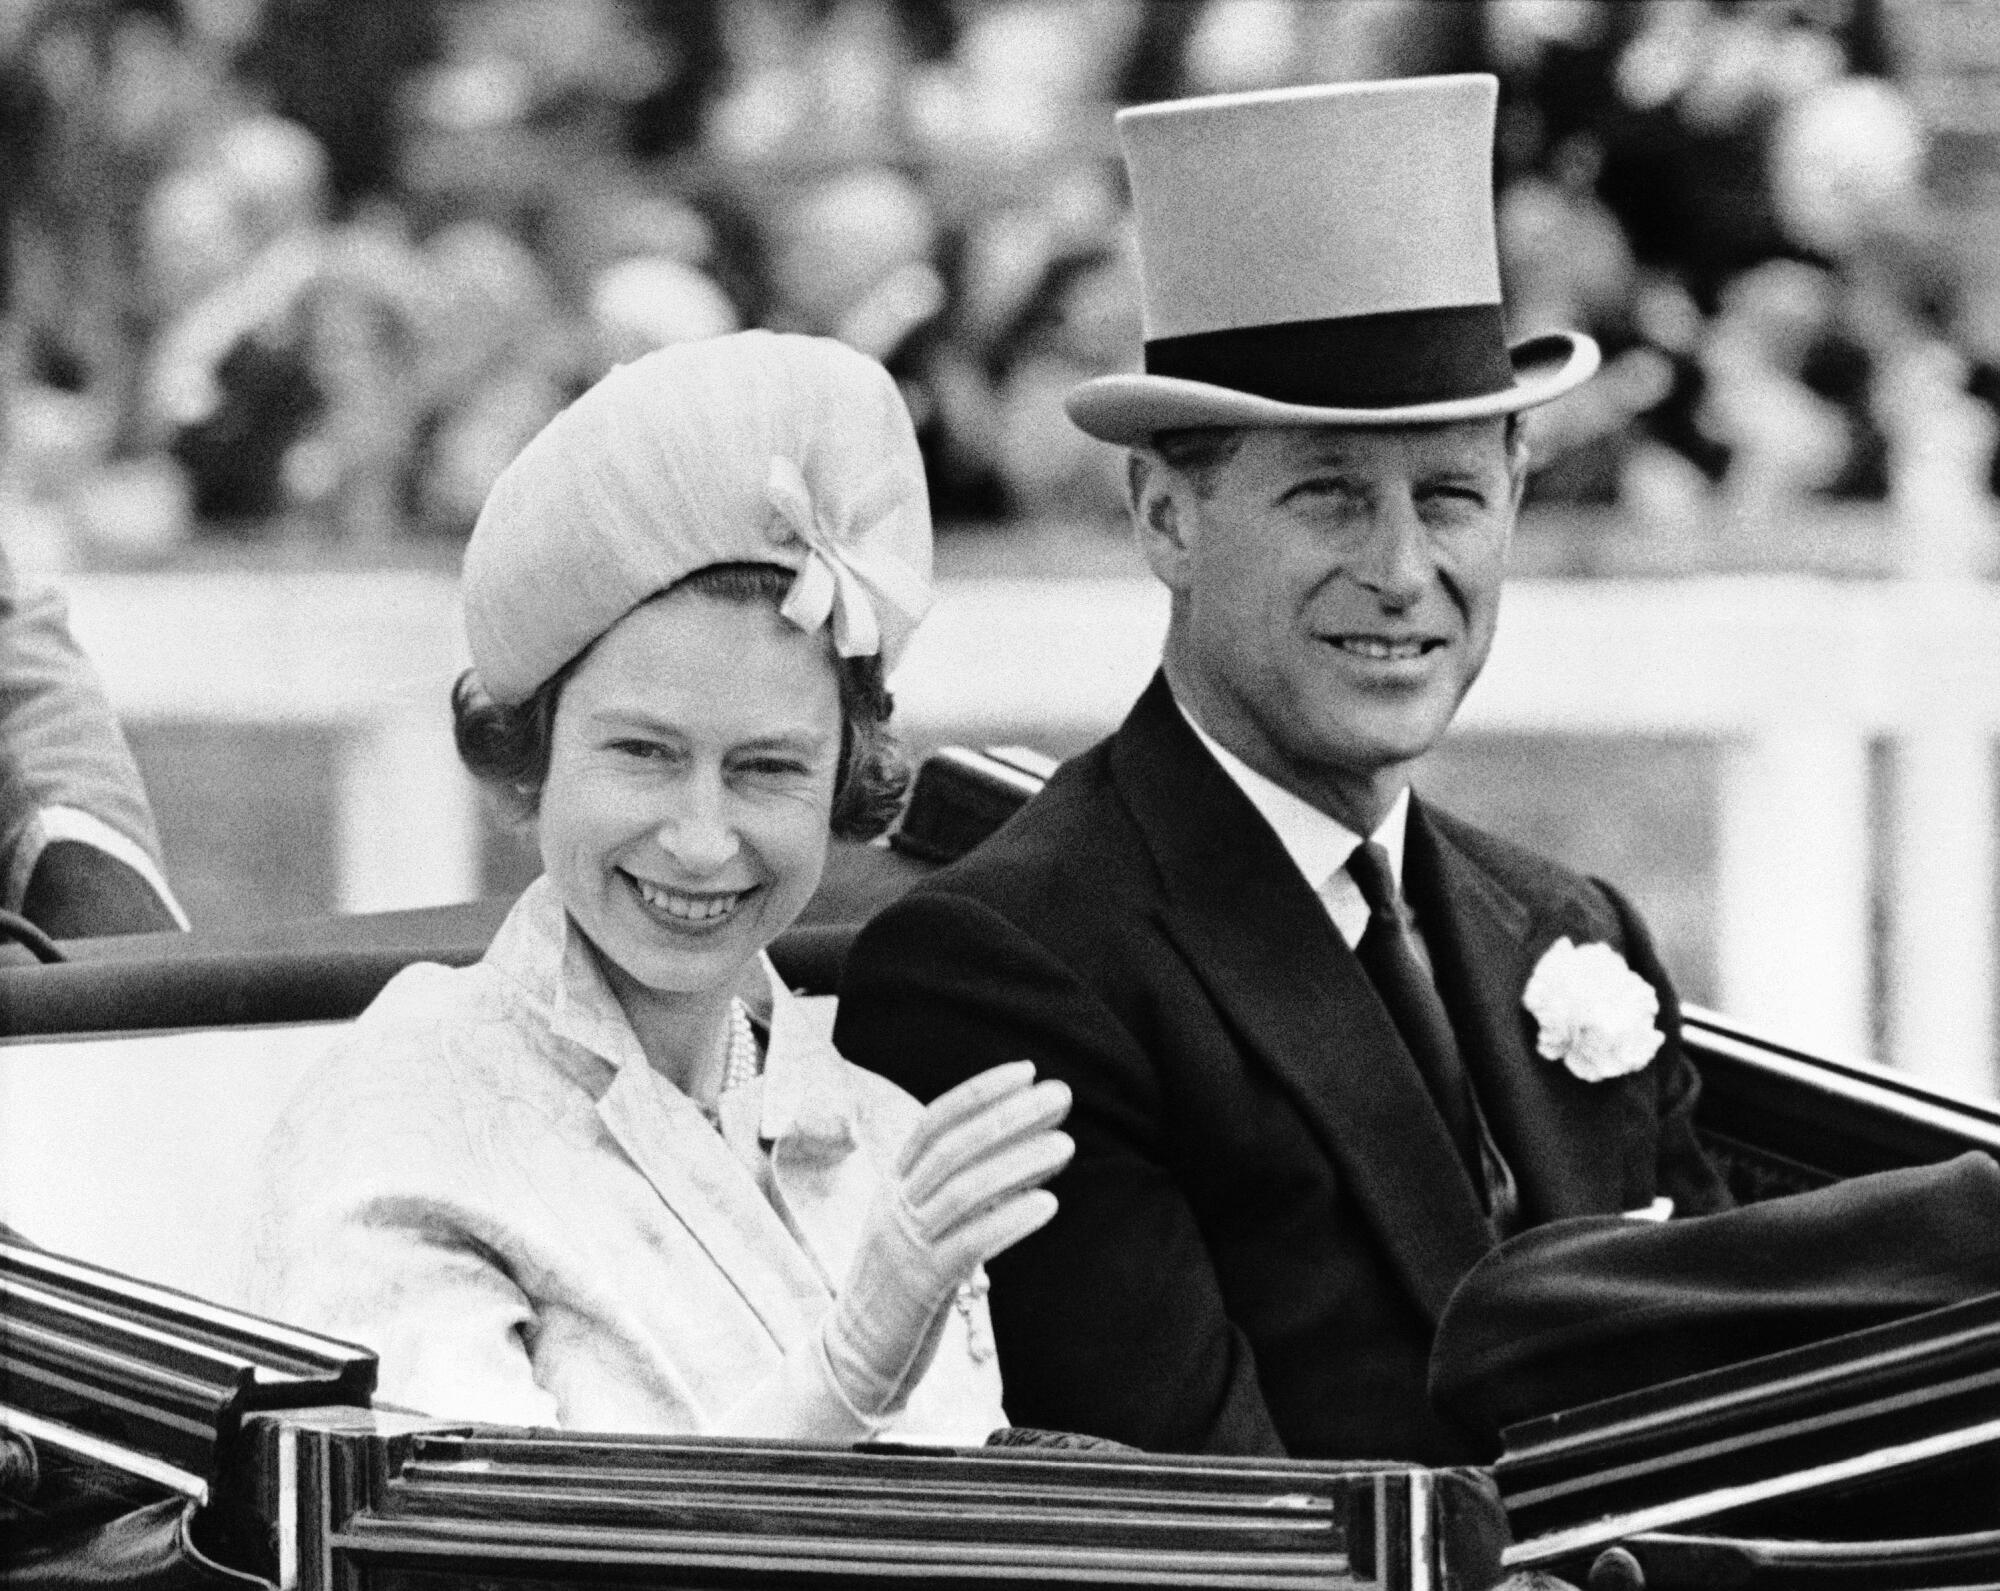 Queen Elizabeth II and Prince Philip arrive dressed up for Royal Ascot